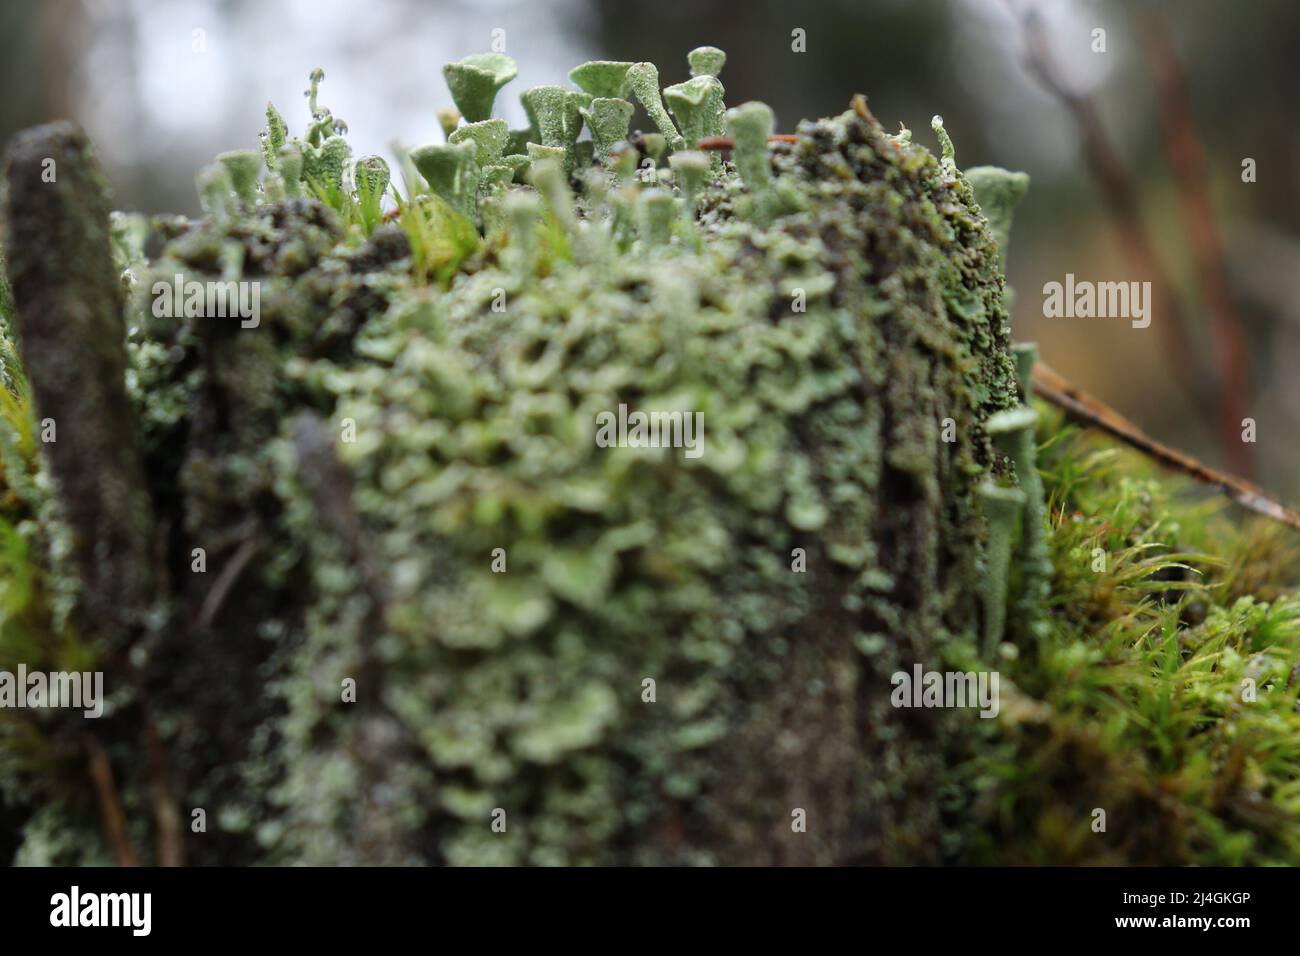 Very small green grey lichen, Cladonia or Pixie Cup Lichens, growing on a stump on the floor of the Palatinate forest in Germany. Stock Photo